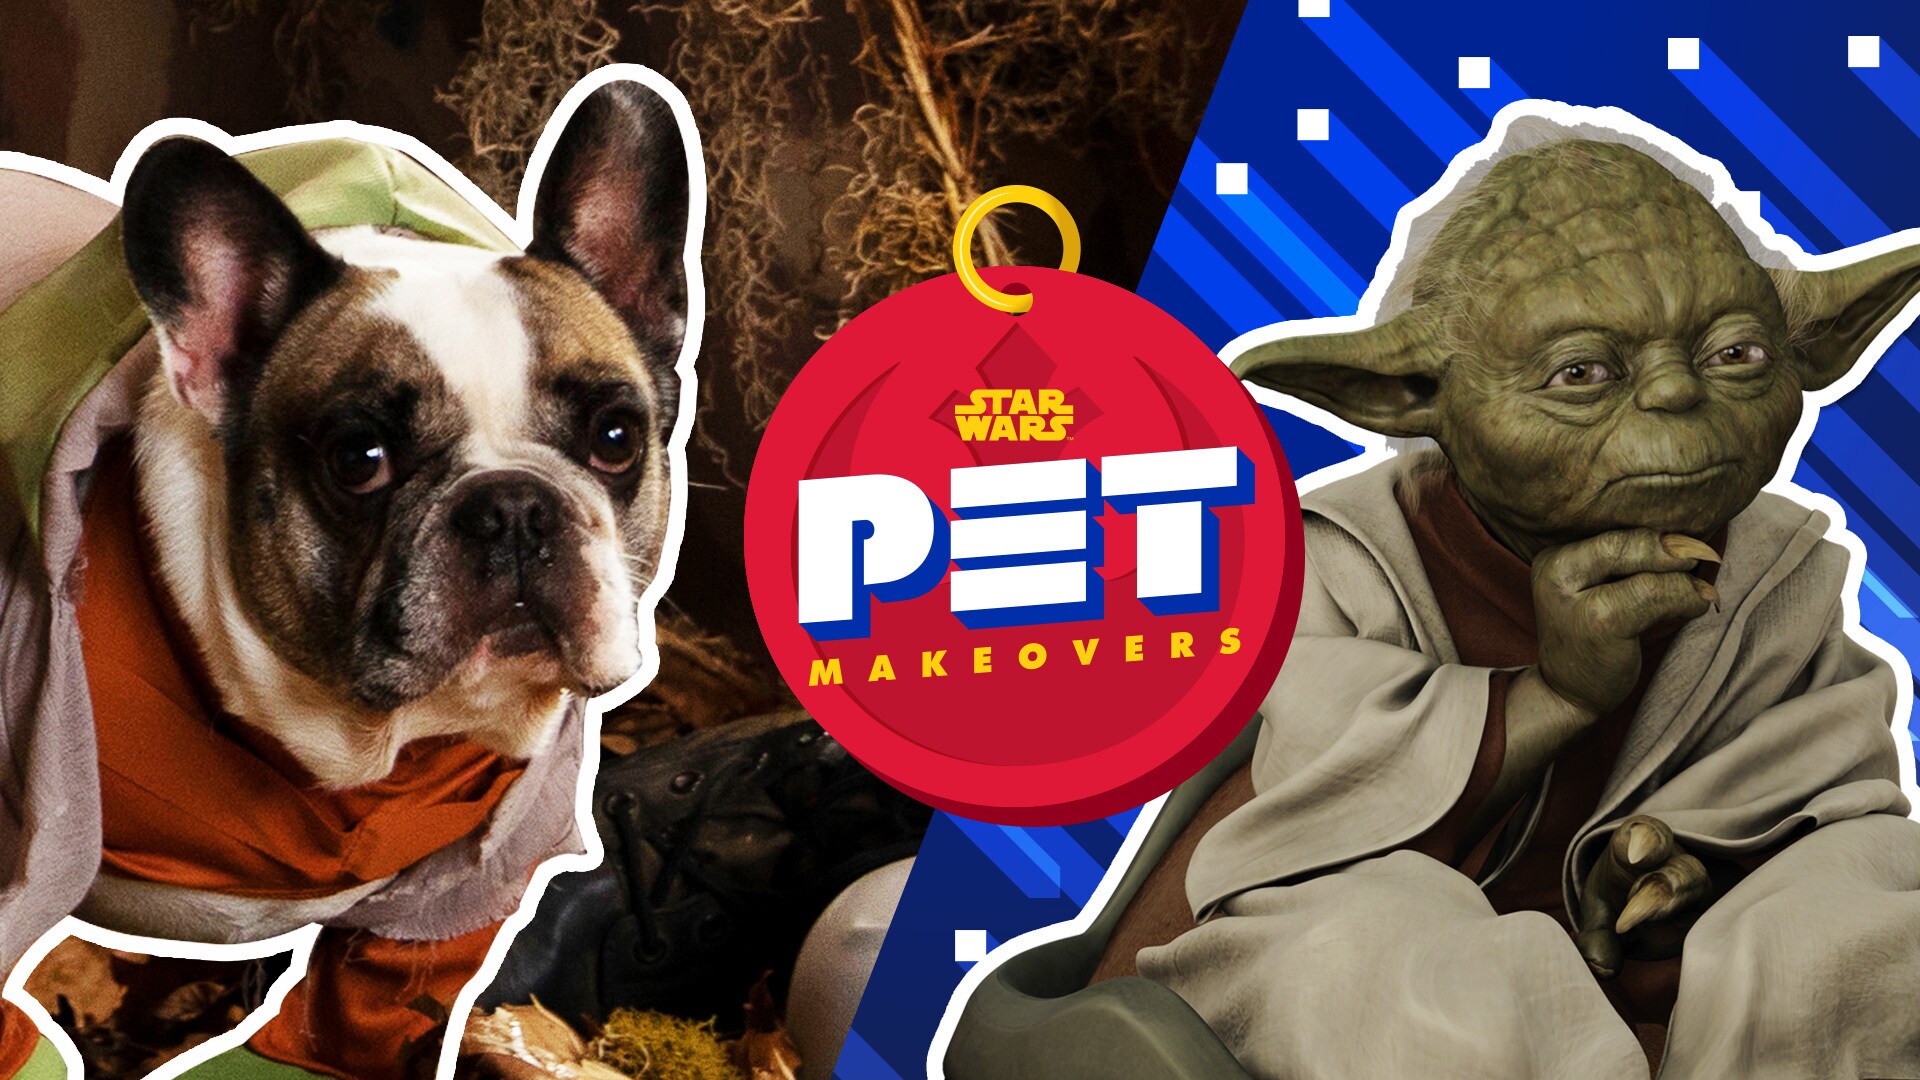 Yoda and Luke Skywalker | Star Wars Pet Makeovers by Oh My Disney